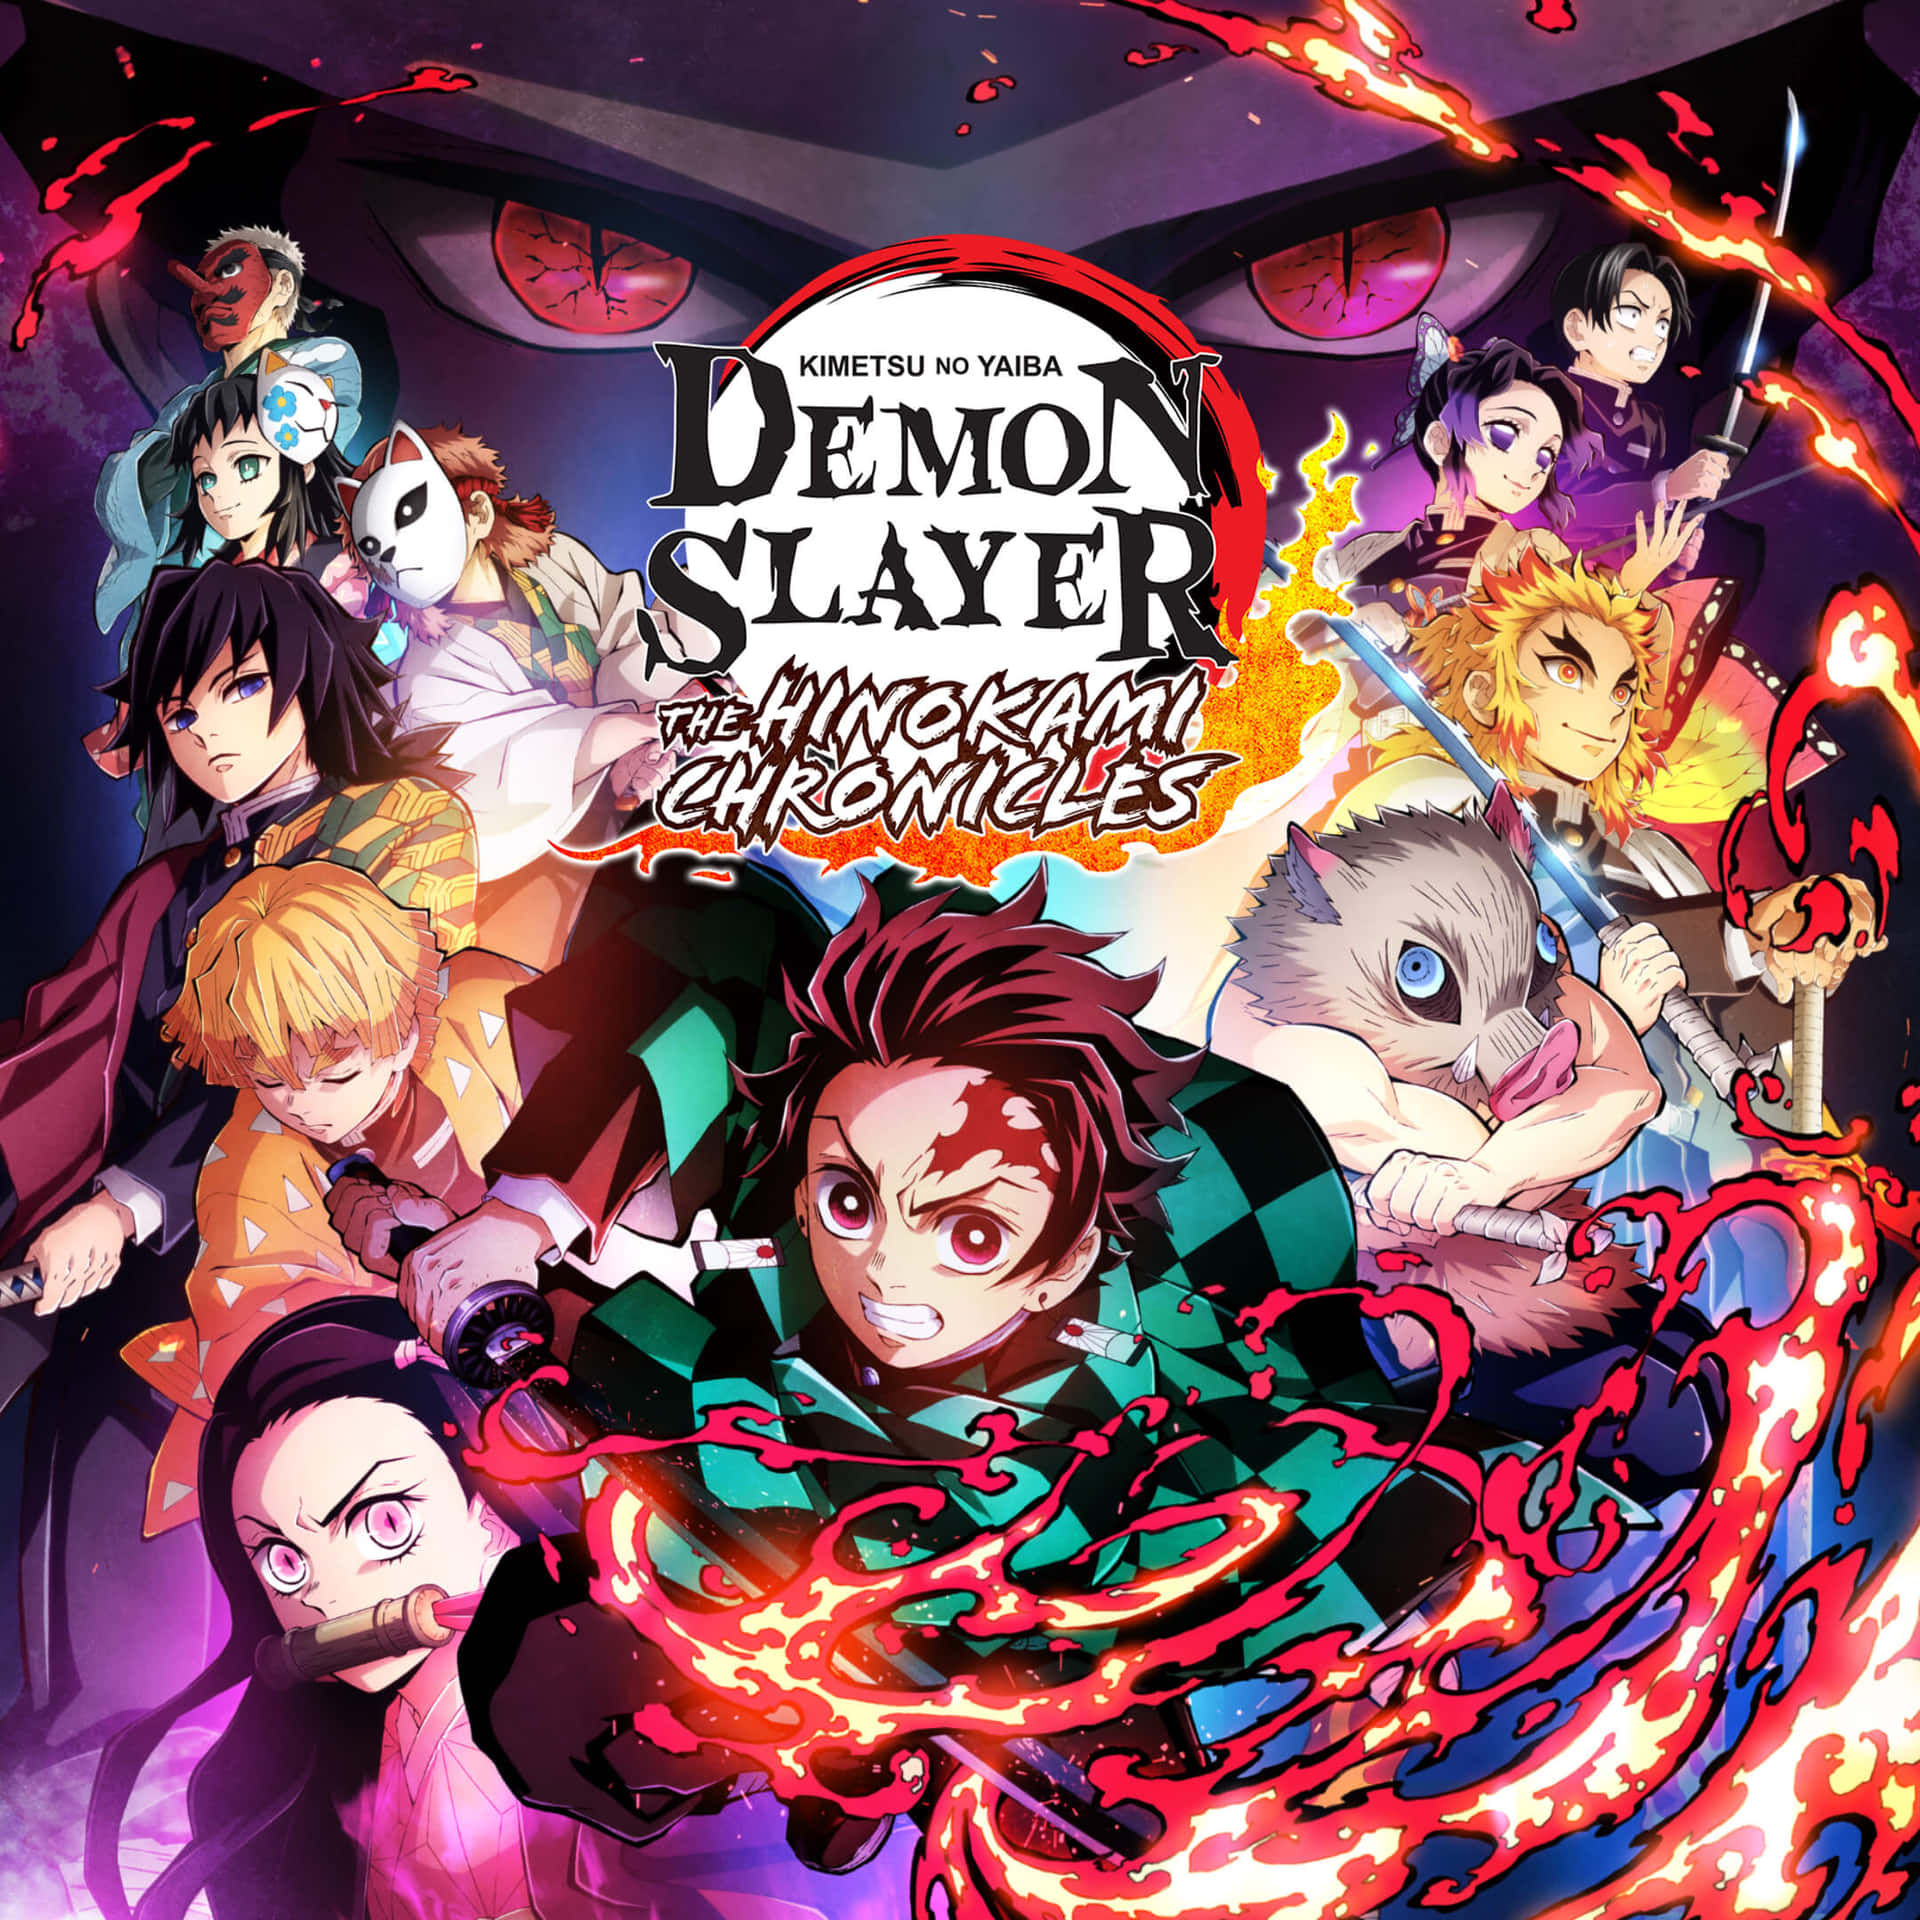 "Bringing the Demon Slayer's fight to life!"